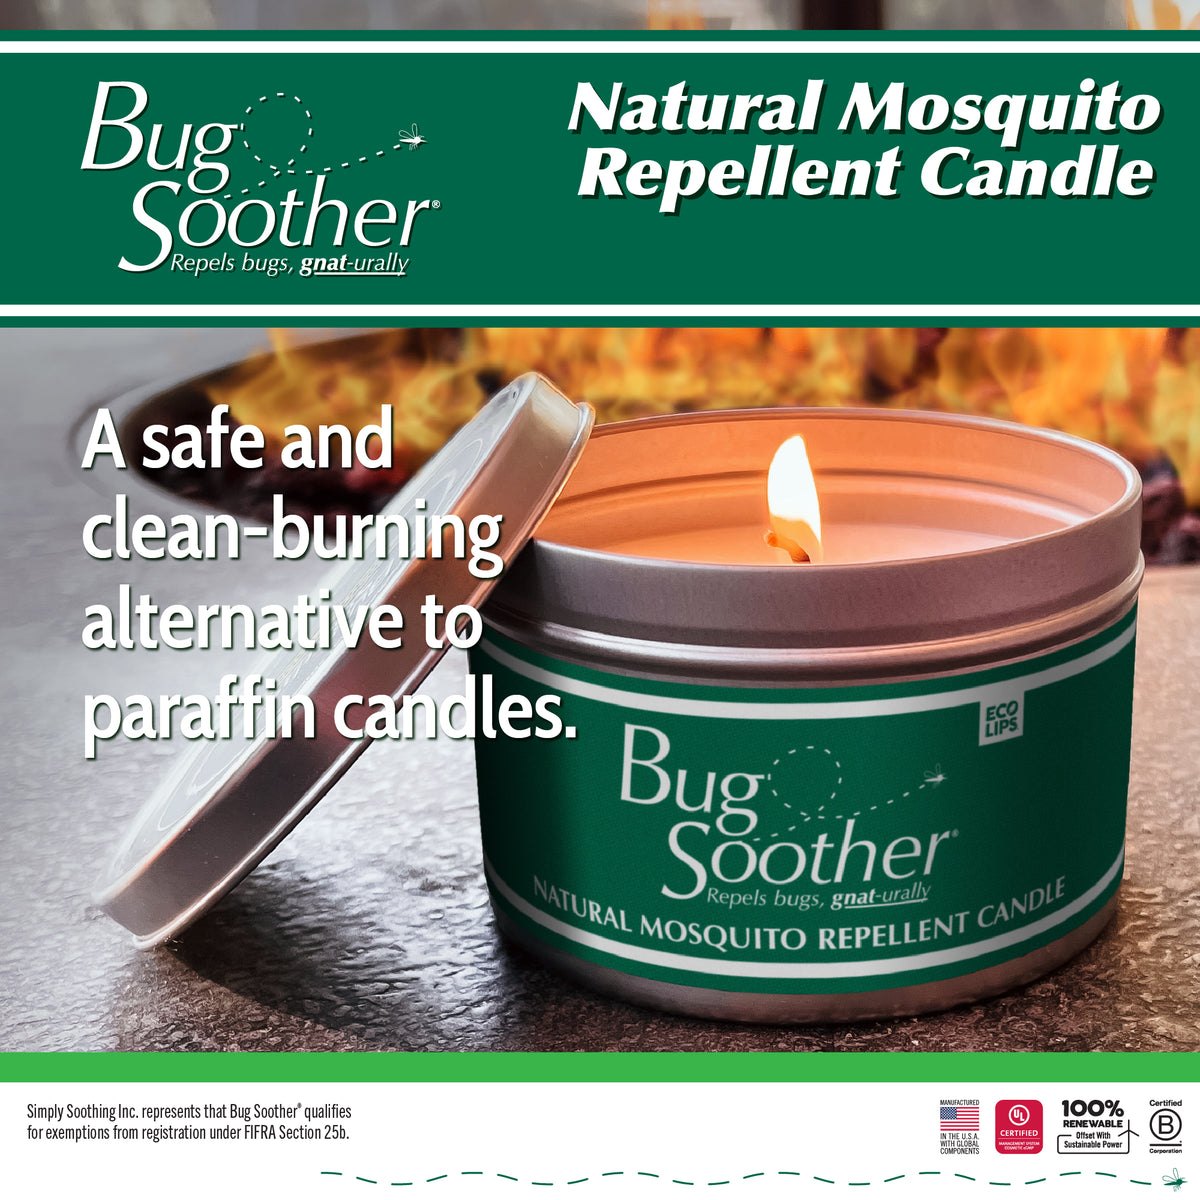 Bug Soother Insect Repellent Candle + 1 oz. Spray Bottle Pack, 2-count